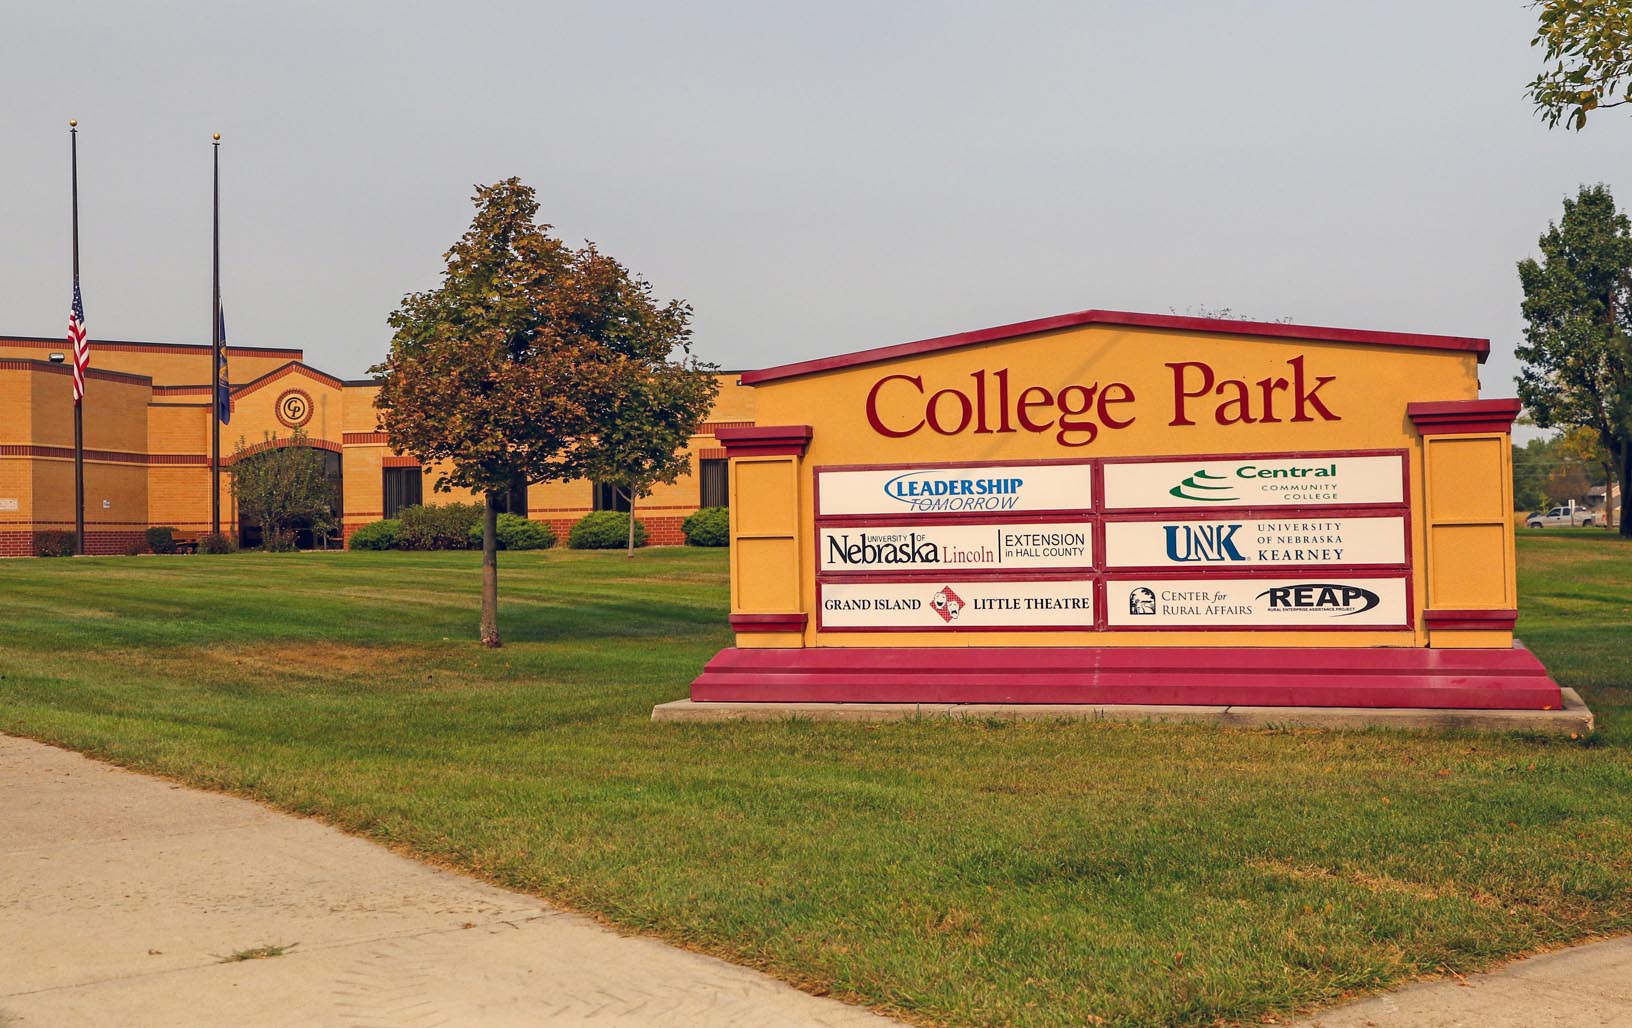 UNK will offer a variety of educational programming at College Park at Grand Island, including undergraduate and graduate courses, certificate programs, workshops and seminars, as well as academic advising and admissions counseling.